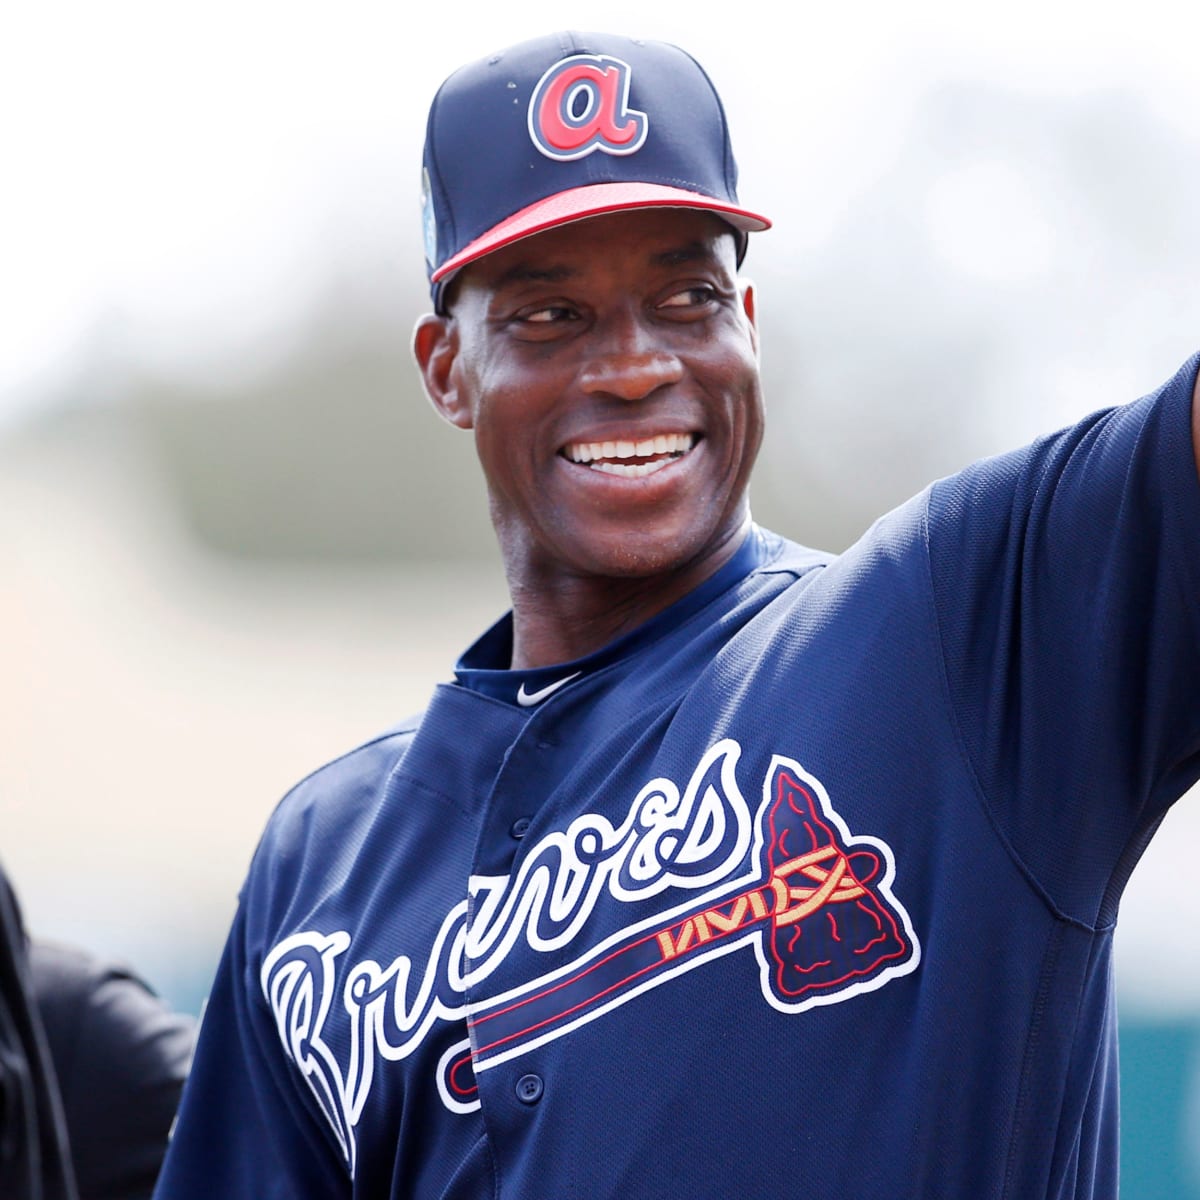 Tampa's Fred McGriff parlayed simple math into a plaque in Cooperstown